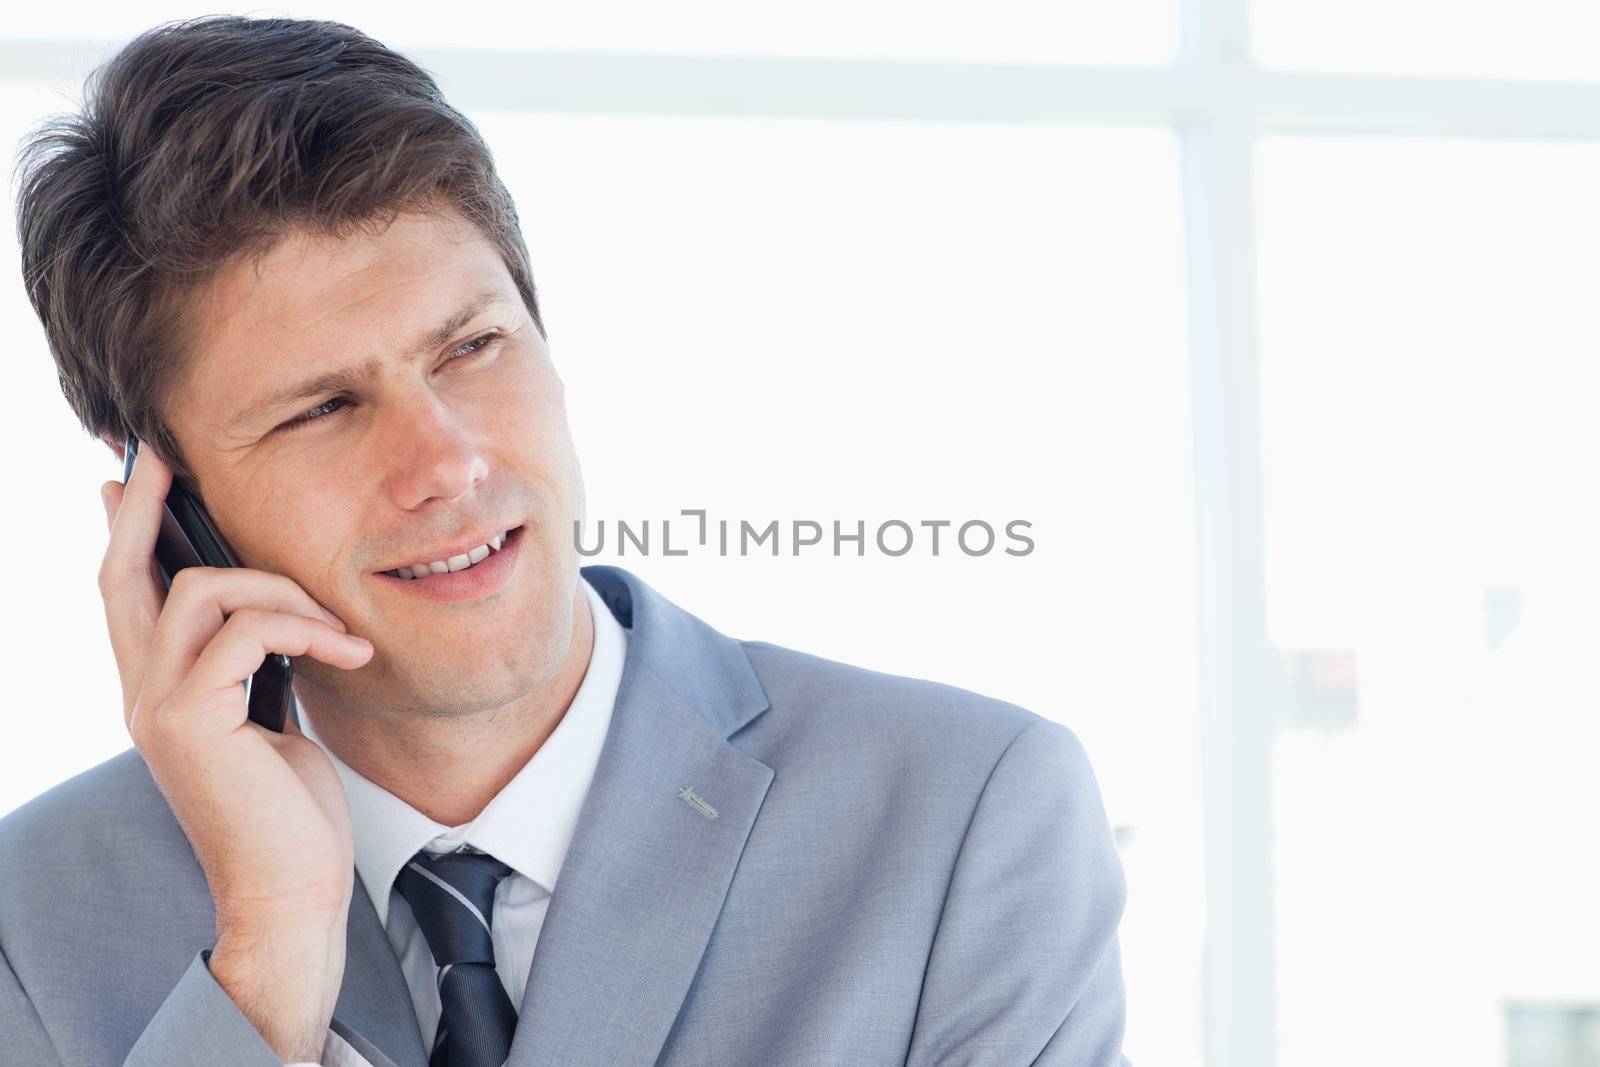 Confident businessman talking on the phone with a serious expression